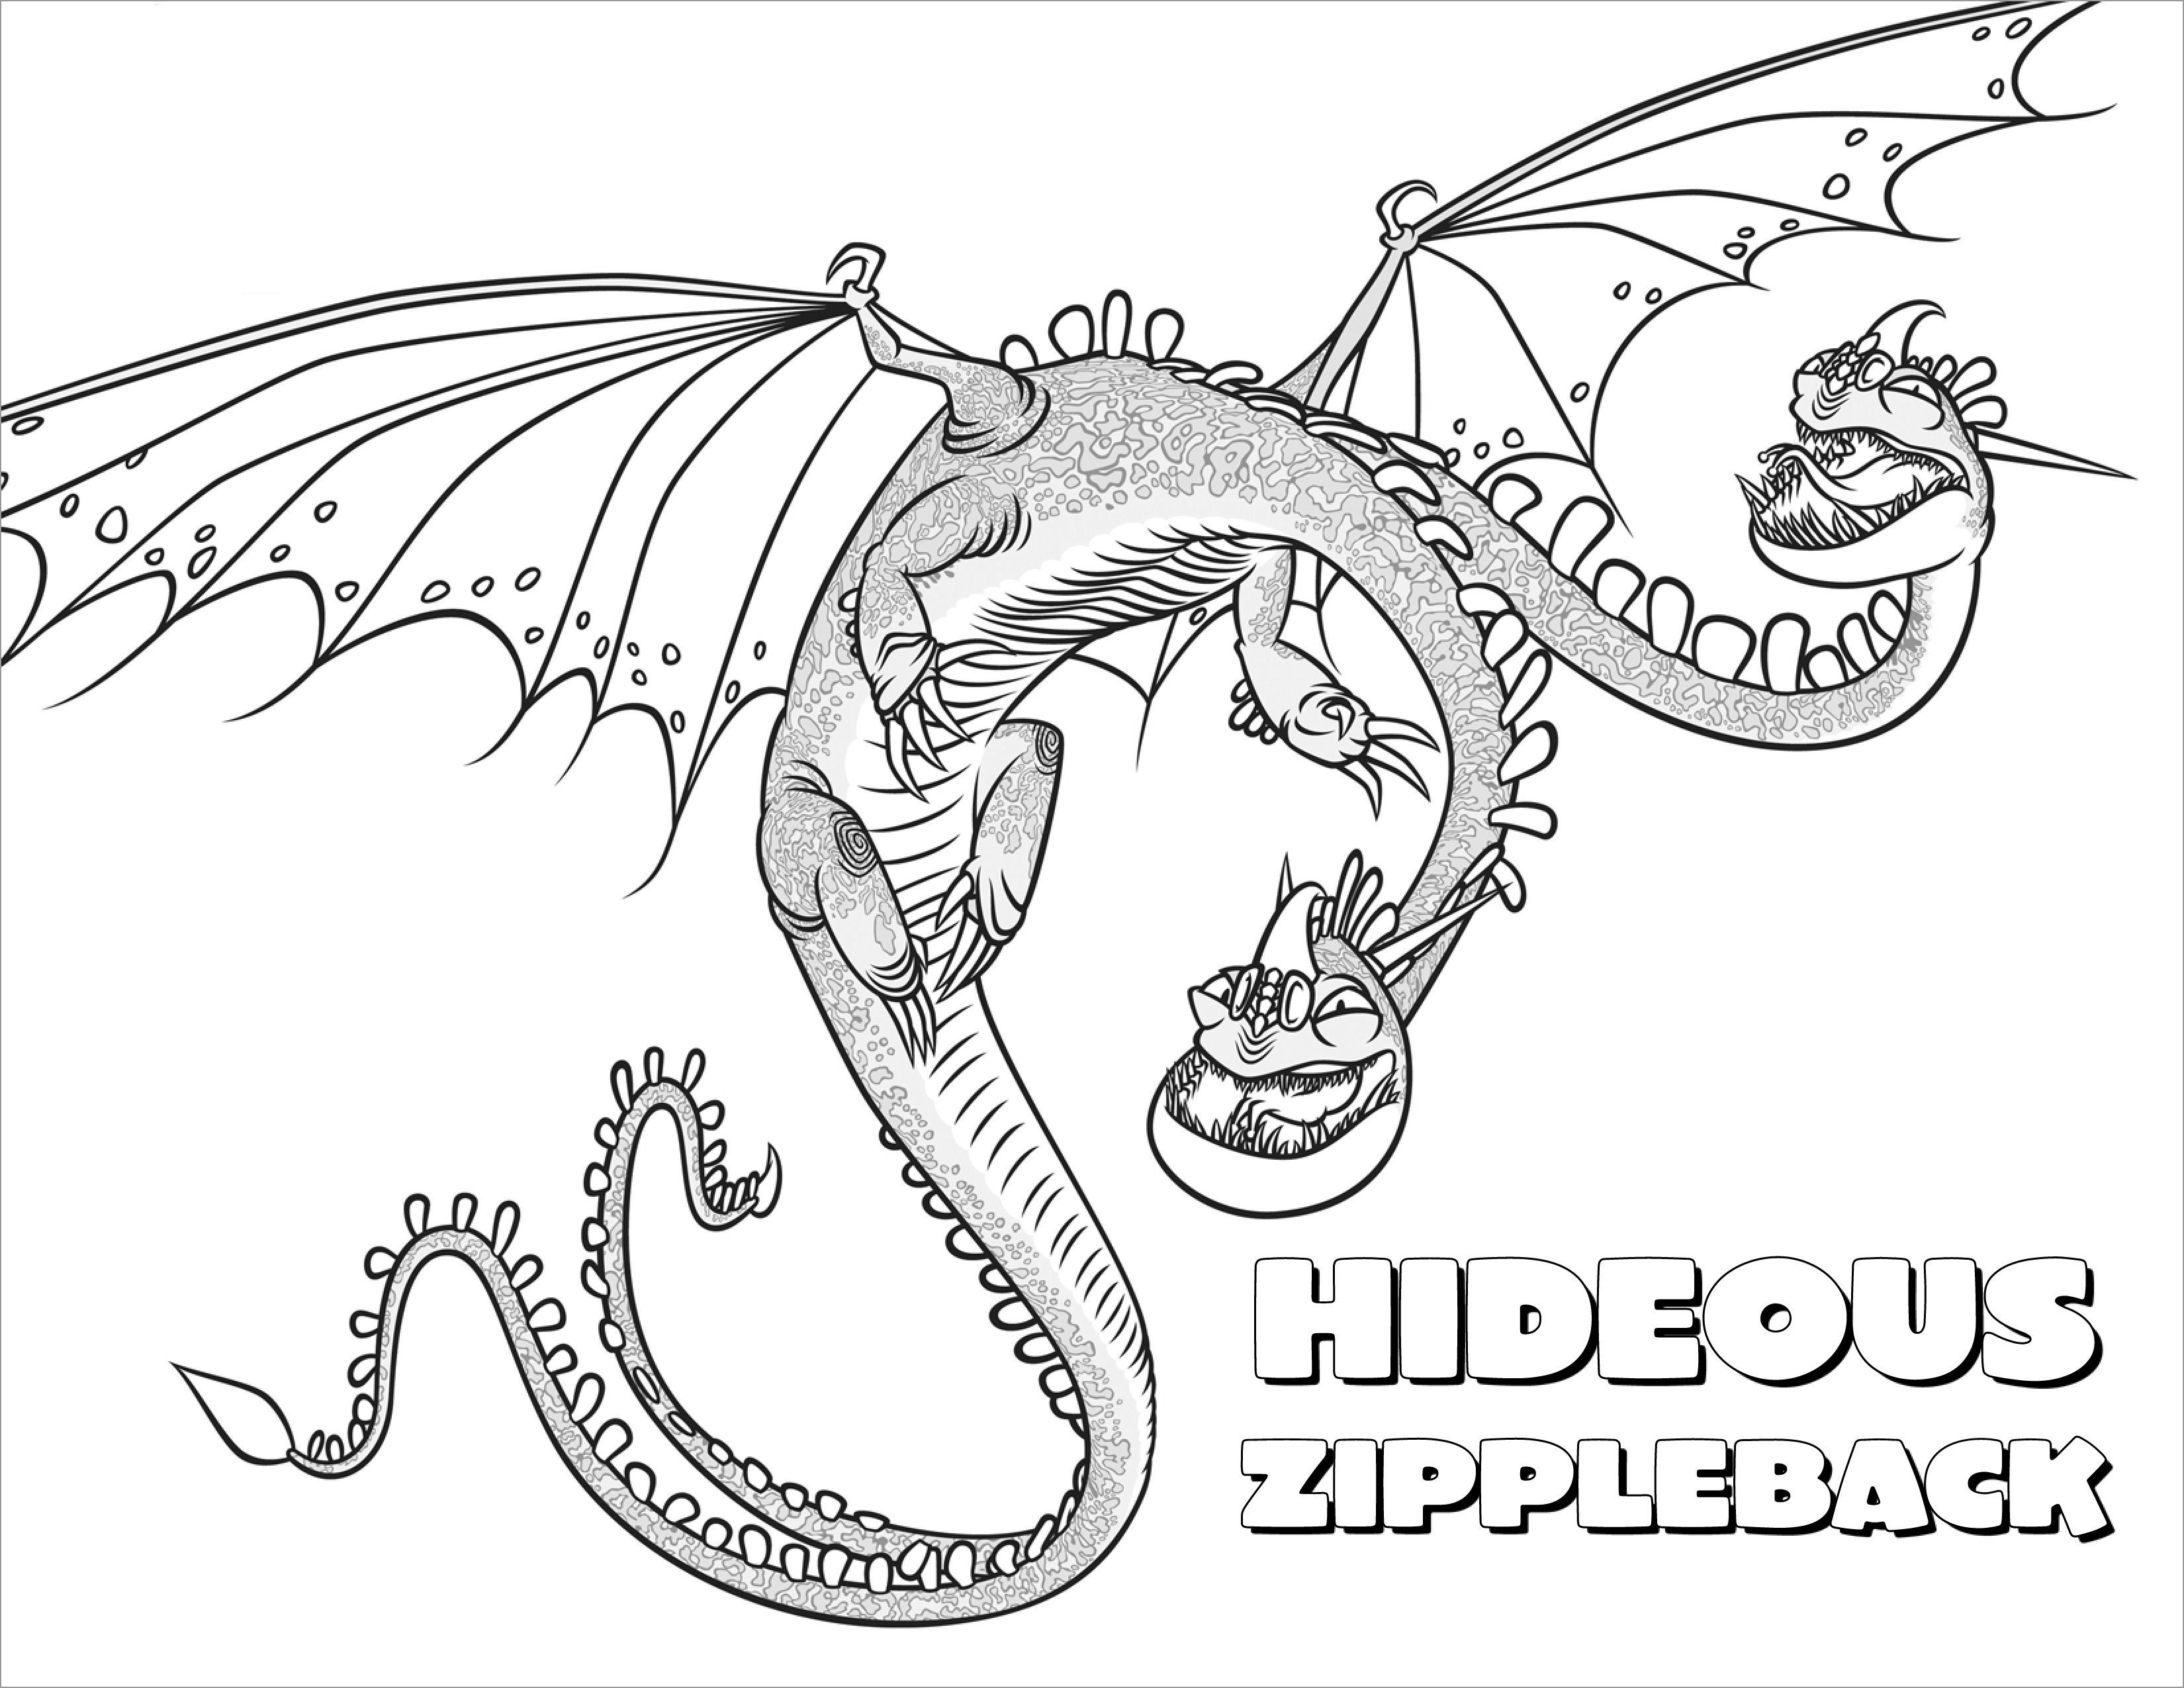 How to Train Your Dragon Hideous Zippleback Coloring Page